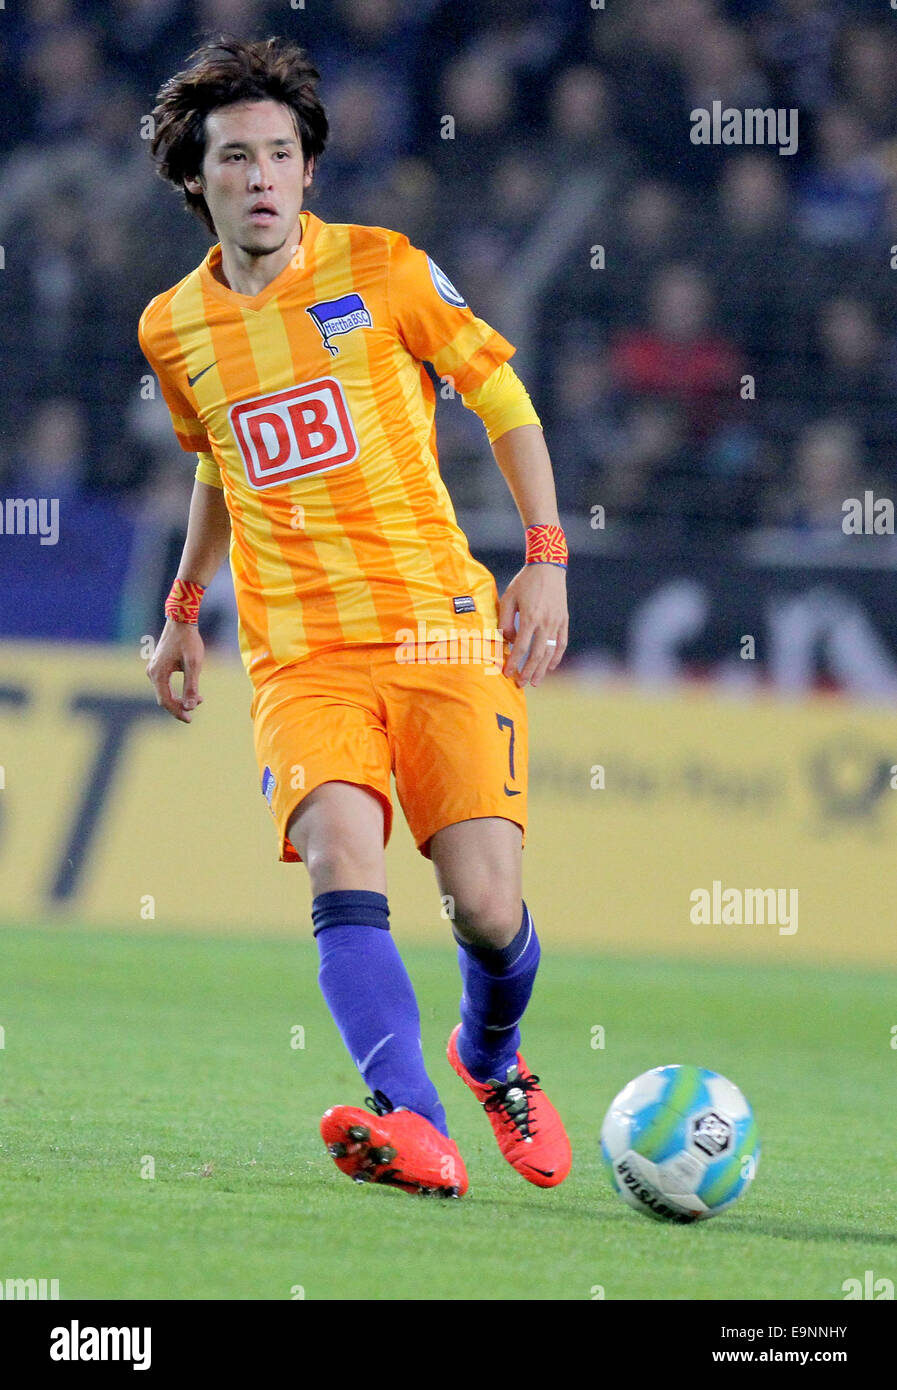 Bielefeld, Germany. 28th Oct, 2014. Berlin's Hosogai Hajime in action during the DFB second round match between Arminia Bielefeld and Hertha BSC in Schueco Arena in Bielefeld, Germany, 28 October 2014. Photo: OLIVER KRATO/dpa/Alamy Live News Stock Photo